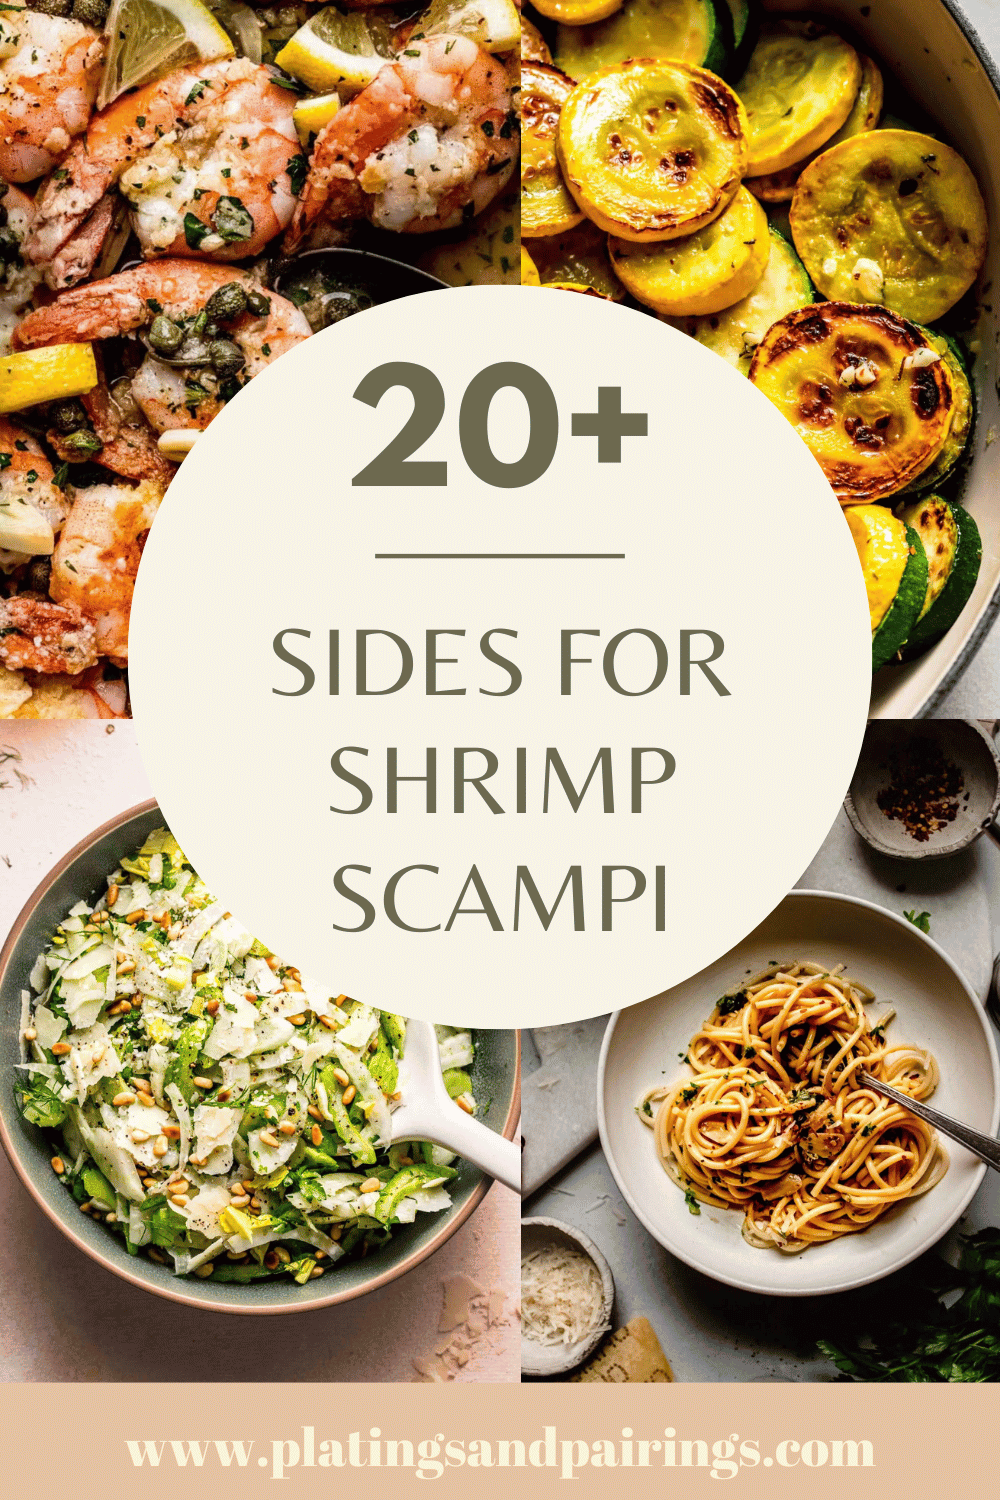 Collage of side dishes for shrimp scampi with text overlay.